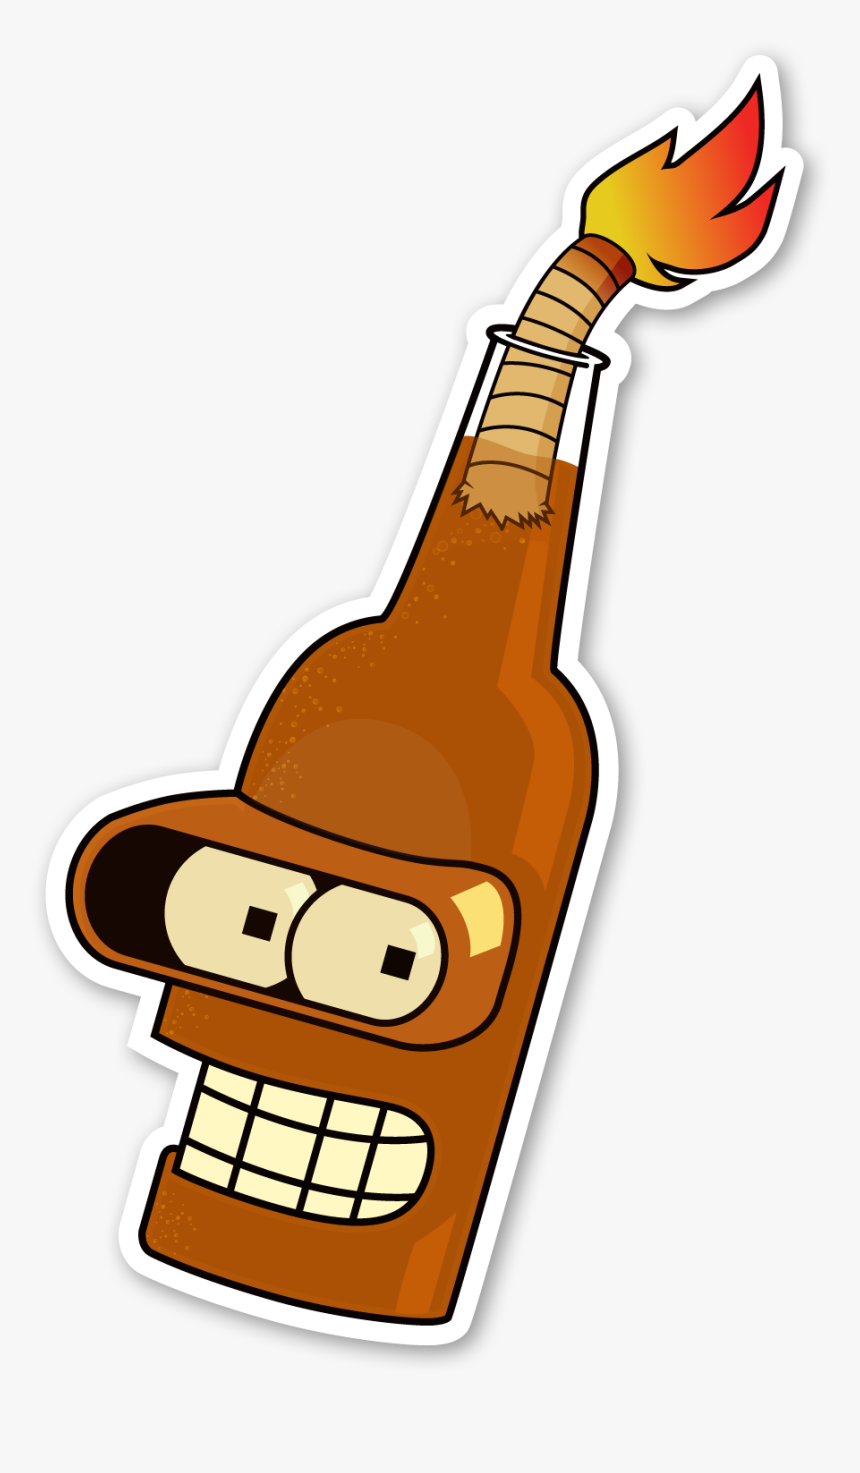 Image Of Bender - Portable Network Graphics, HD Png Download, Free Download